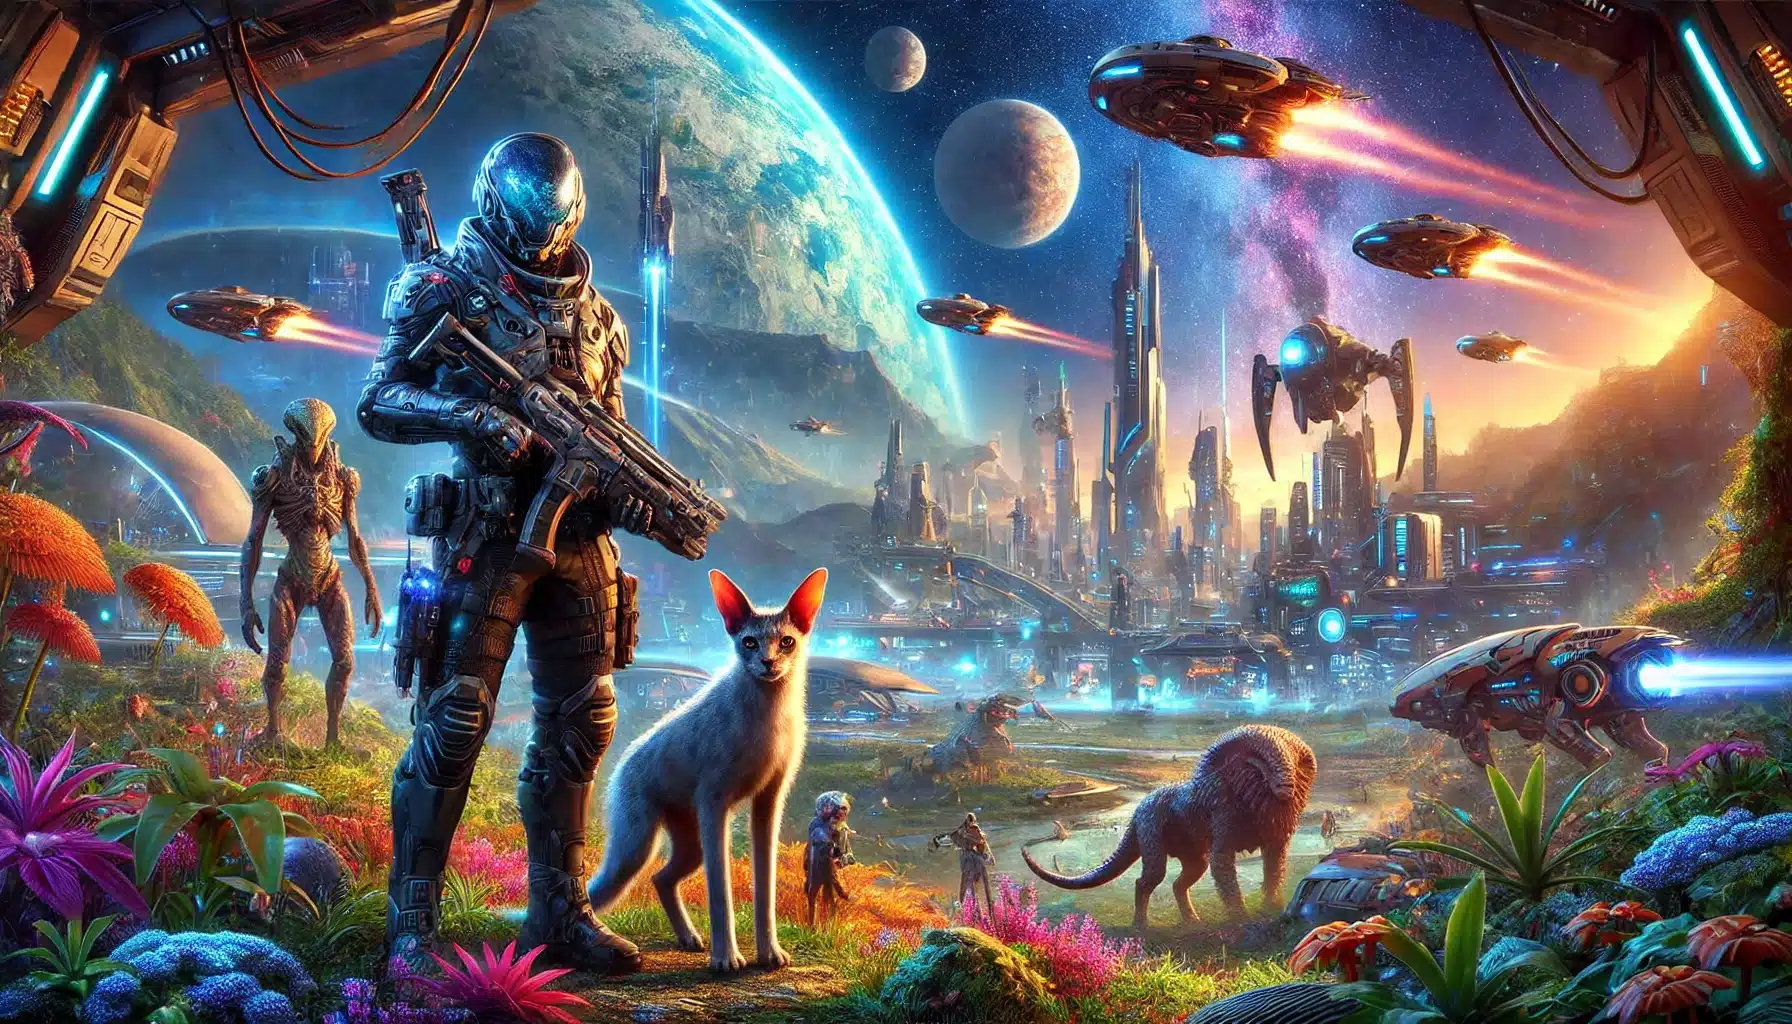 A futuristic alien landscape with vibrant flora, diverse alien species, and a high-tech city. An armored figure and an alien companion stand in the foreground.